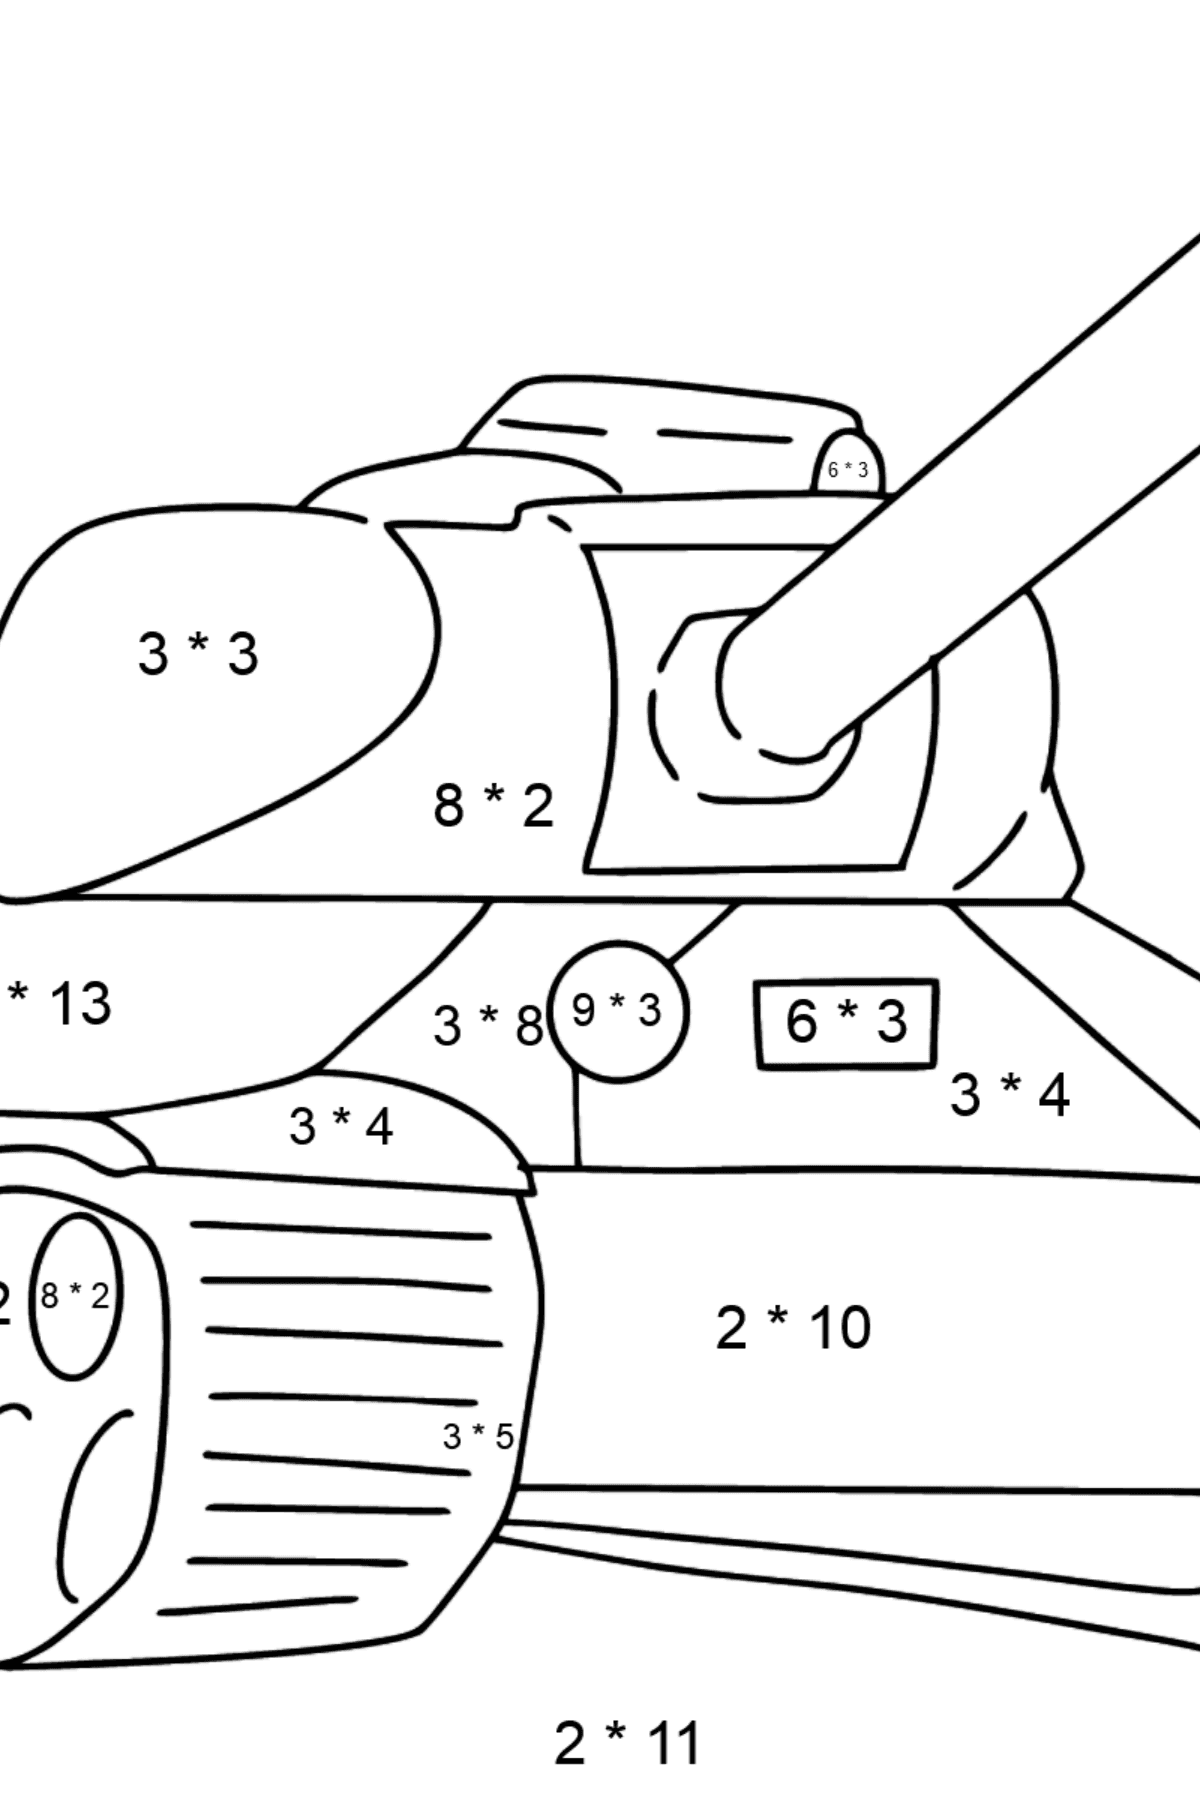 Tank IS 2 coloring page - Math Coloring - Multiplication for Kids